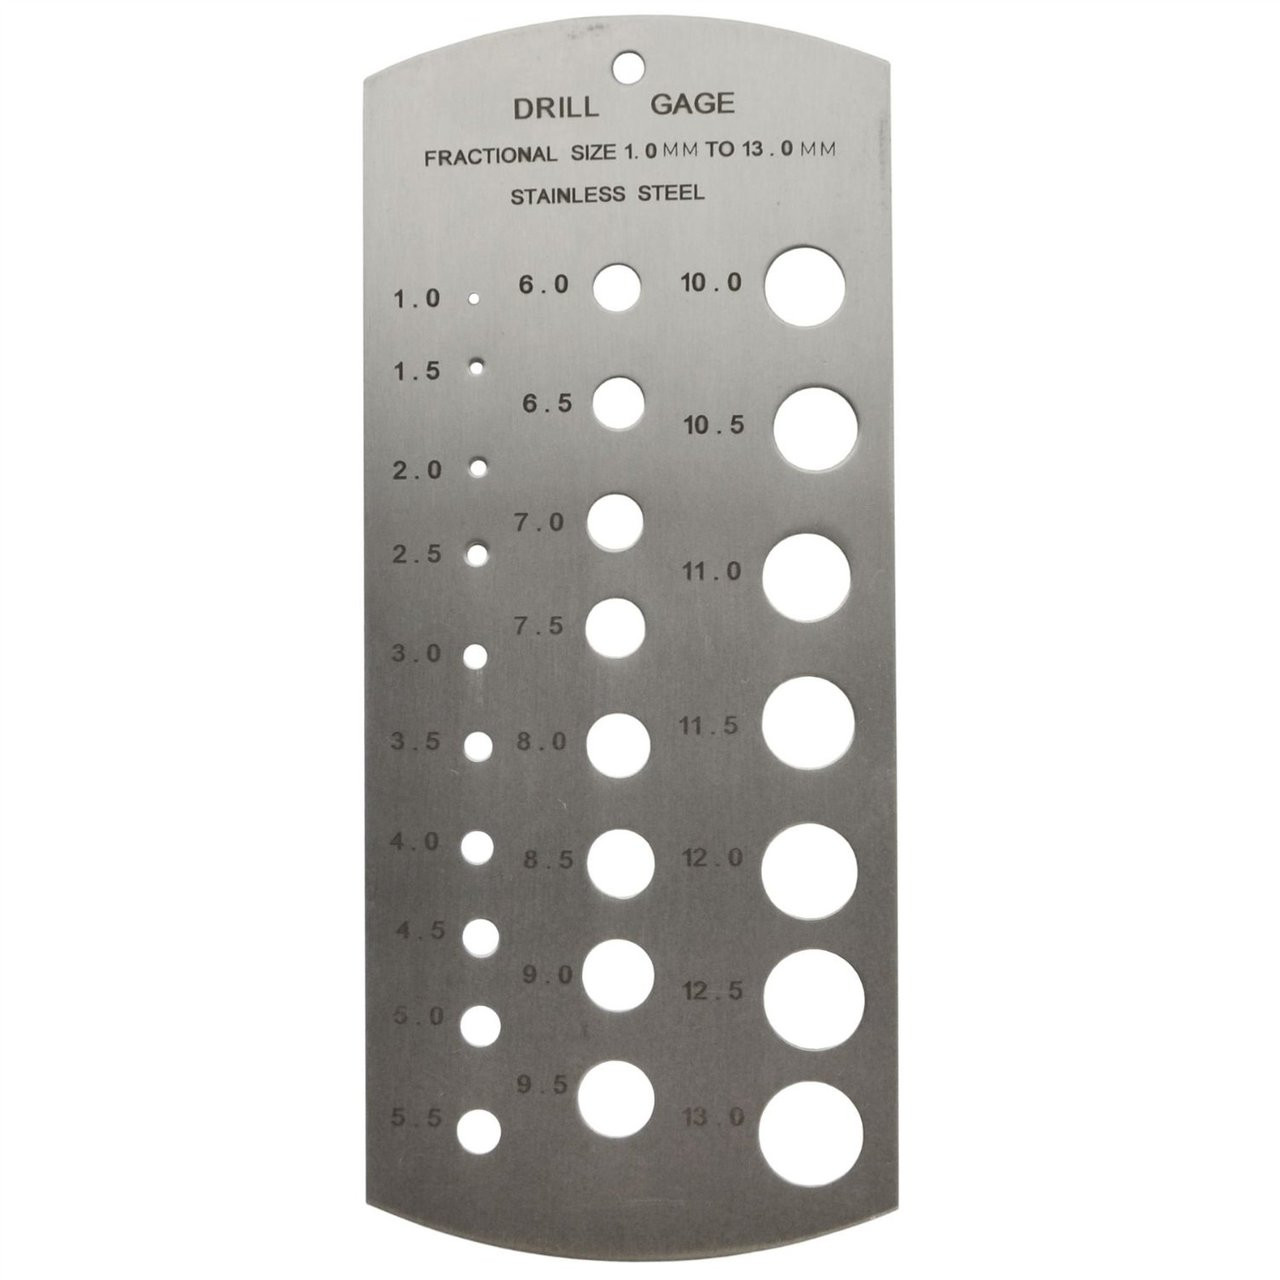 Metric Drill Gauge measure drill sizes from 1.0mm to 13.0mm with ease